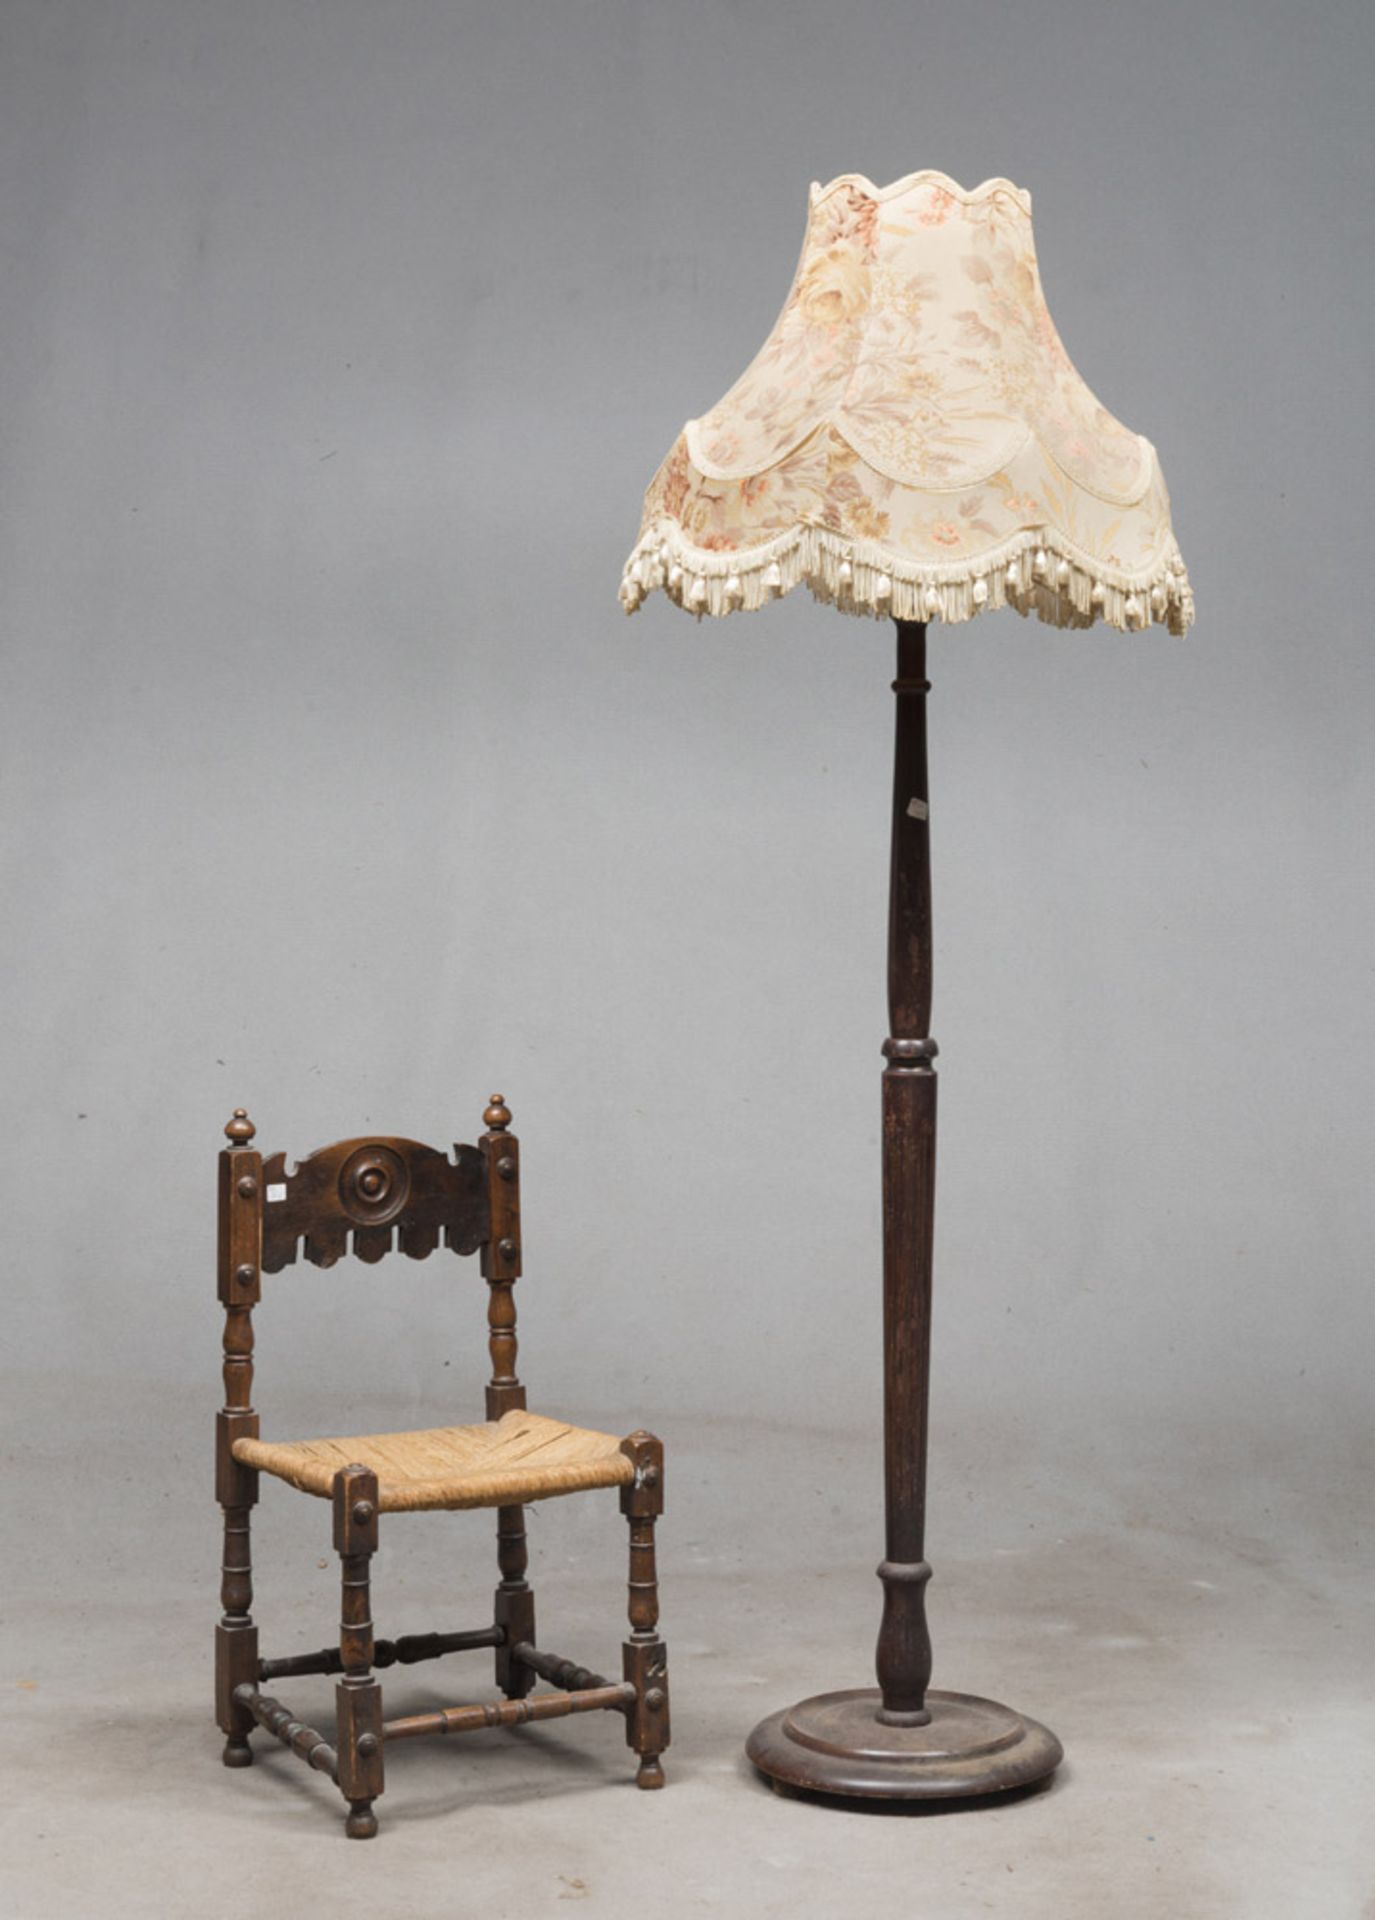 FLOOR LAMP AND SMALL CHAIR – EARLY 20TH CENTURY